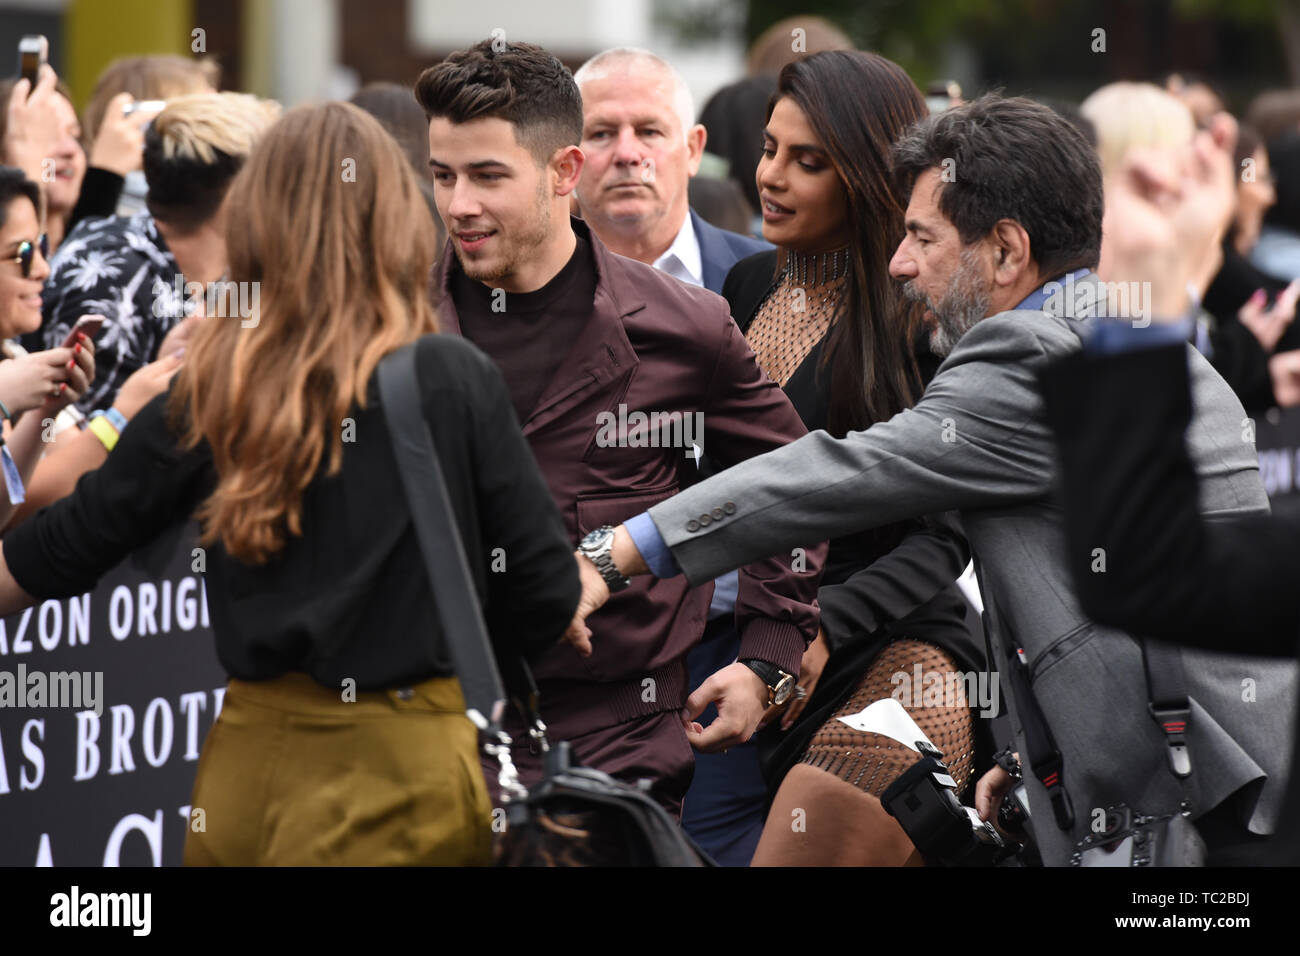 June 3, 2019 - Westwood, California, USA - 02, June 2019 - Westwood Village, California. Nick Jonas attends Premiere Of Amazon Prime Video's 'Chasing Happiness' at the Regency Village Bruin Theatre. (Credit Image: © Billy Bennight/ZUMA Wire) Stock Photo